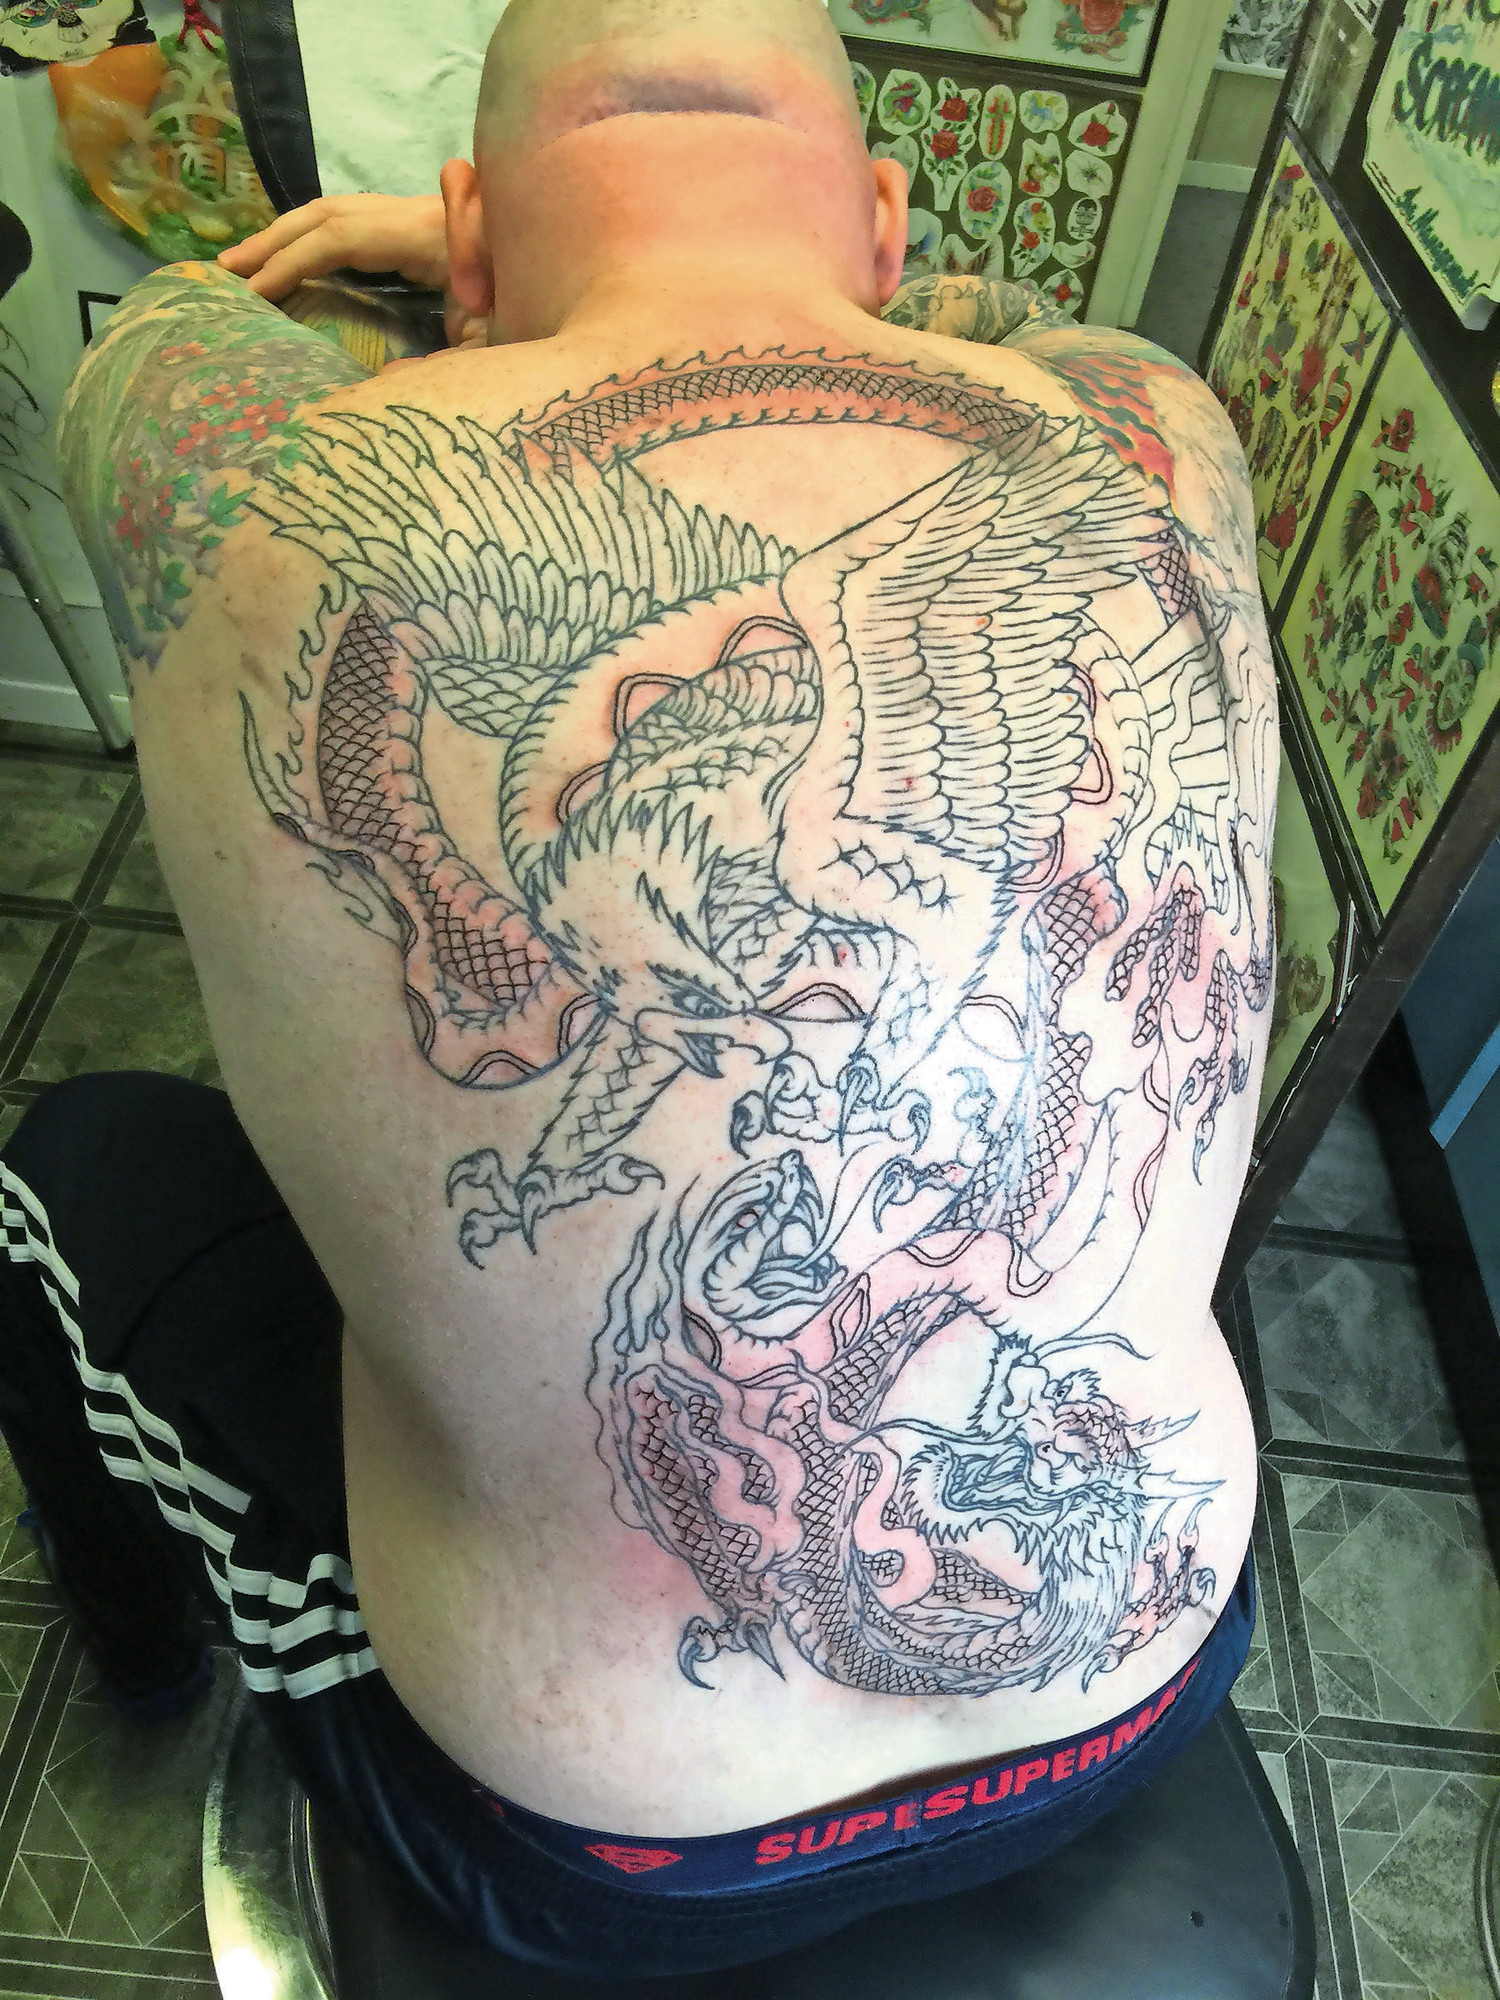 Eric Voye got a tattoo of an eagle battling a dragon last week. Montgomery inked the rest of the tattoo on Friday. Voye will go back one last time for coloring.